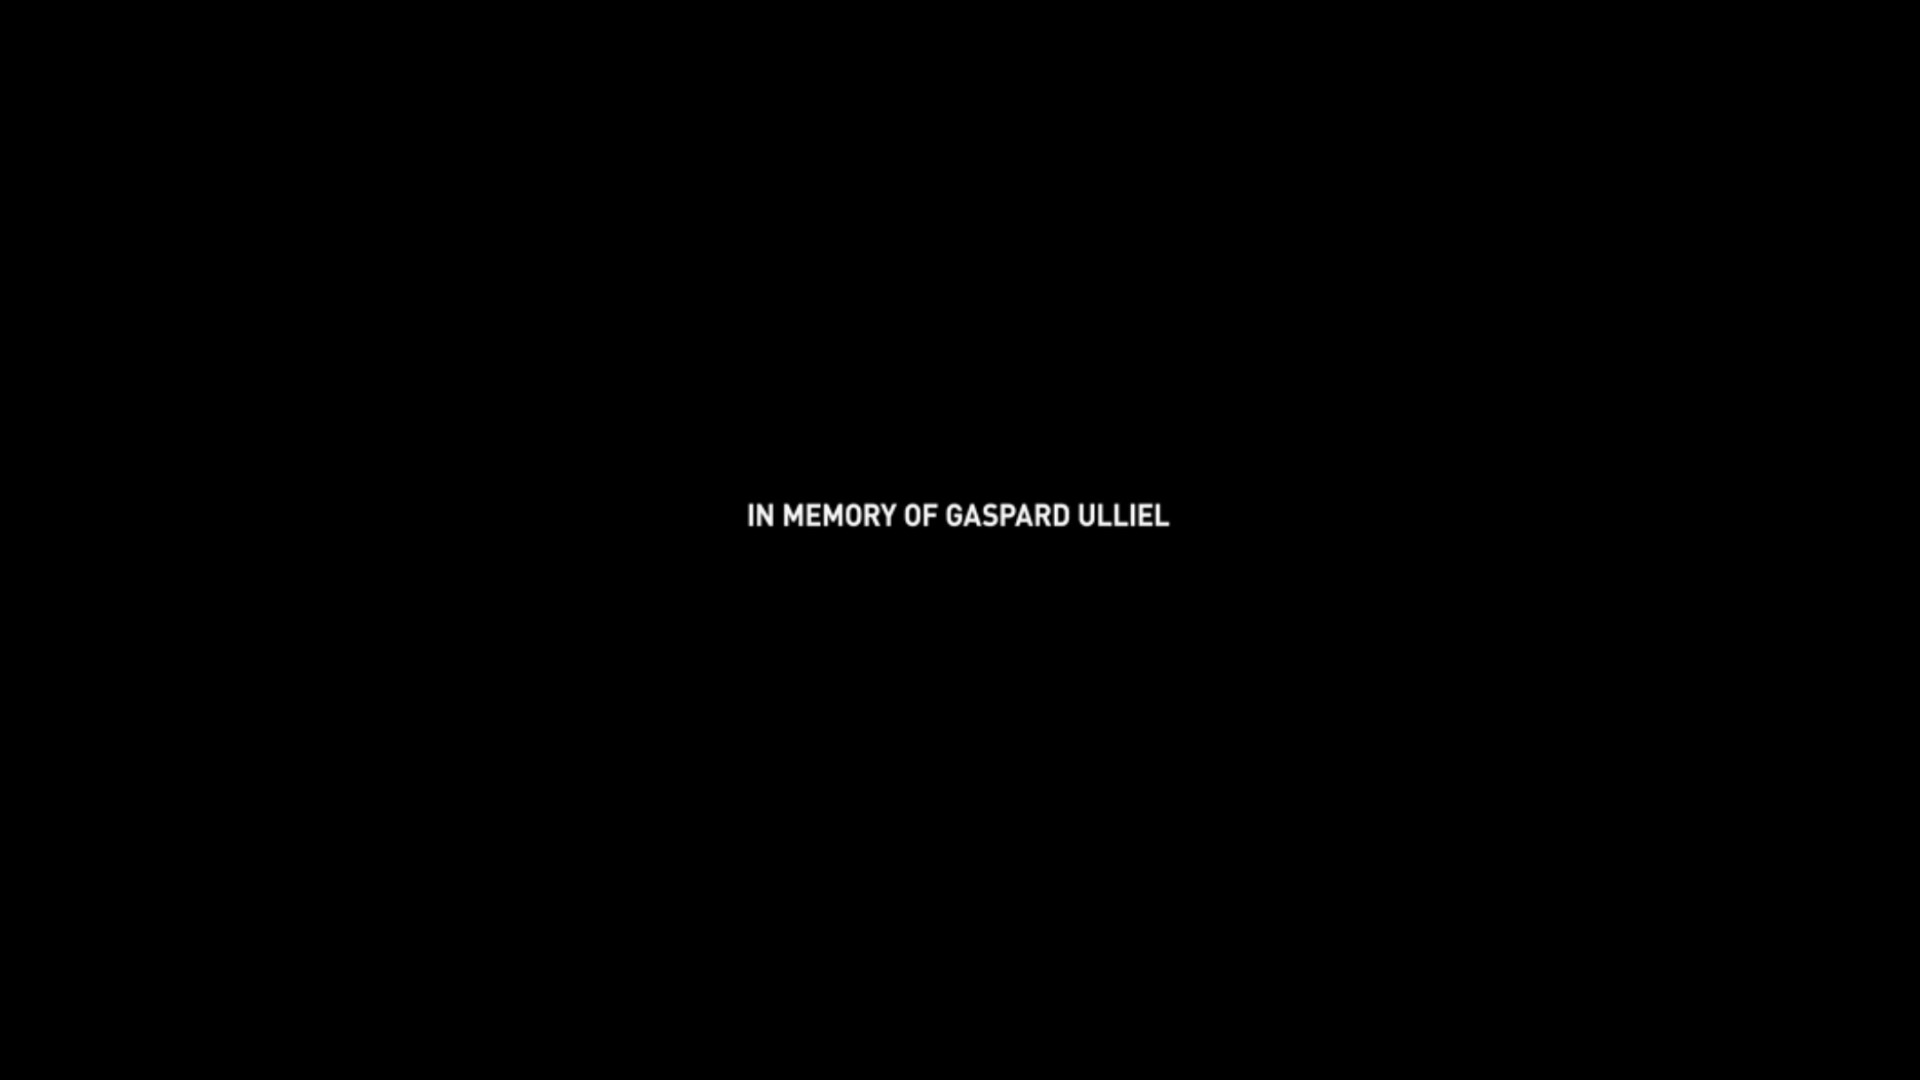 Moon Knight Episode 3 Credits: In honor of Gaspard Ulliel